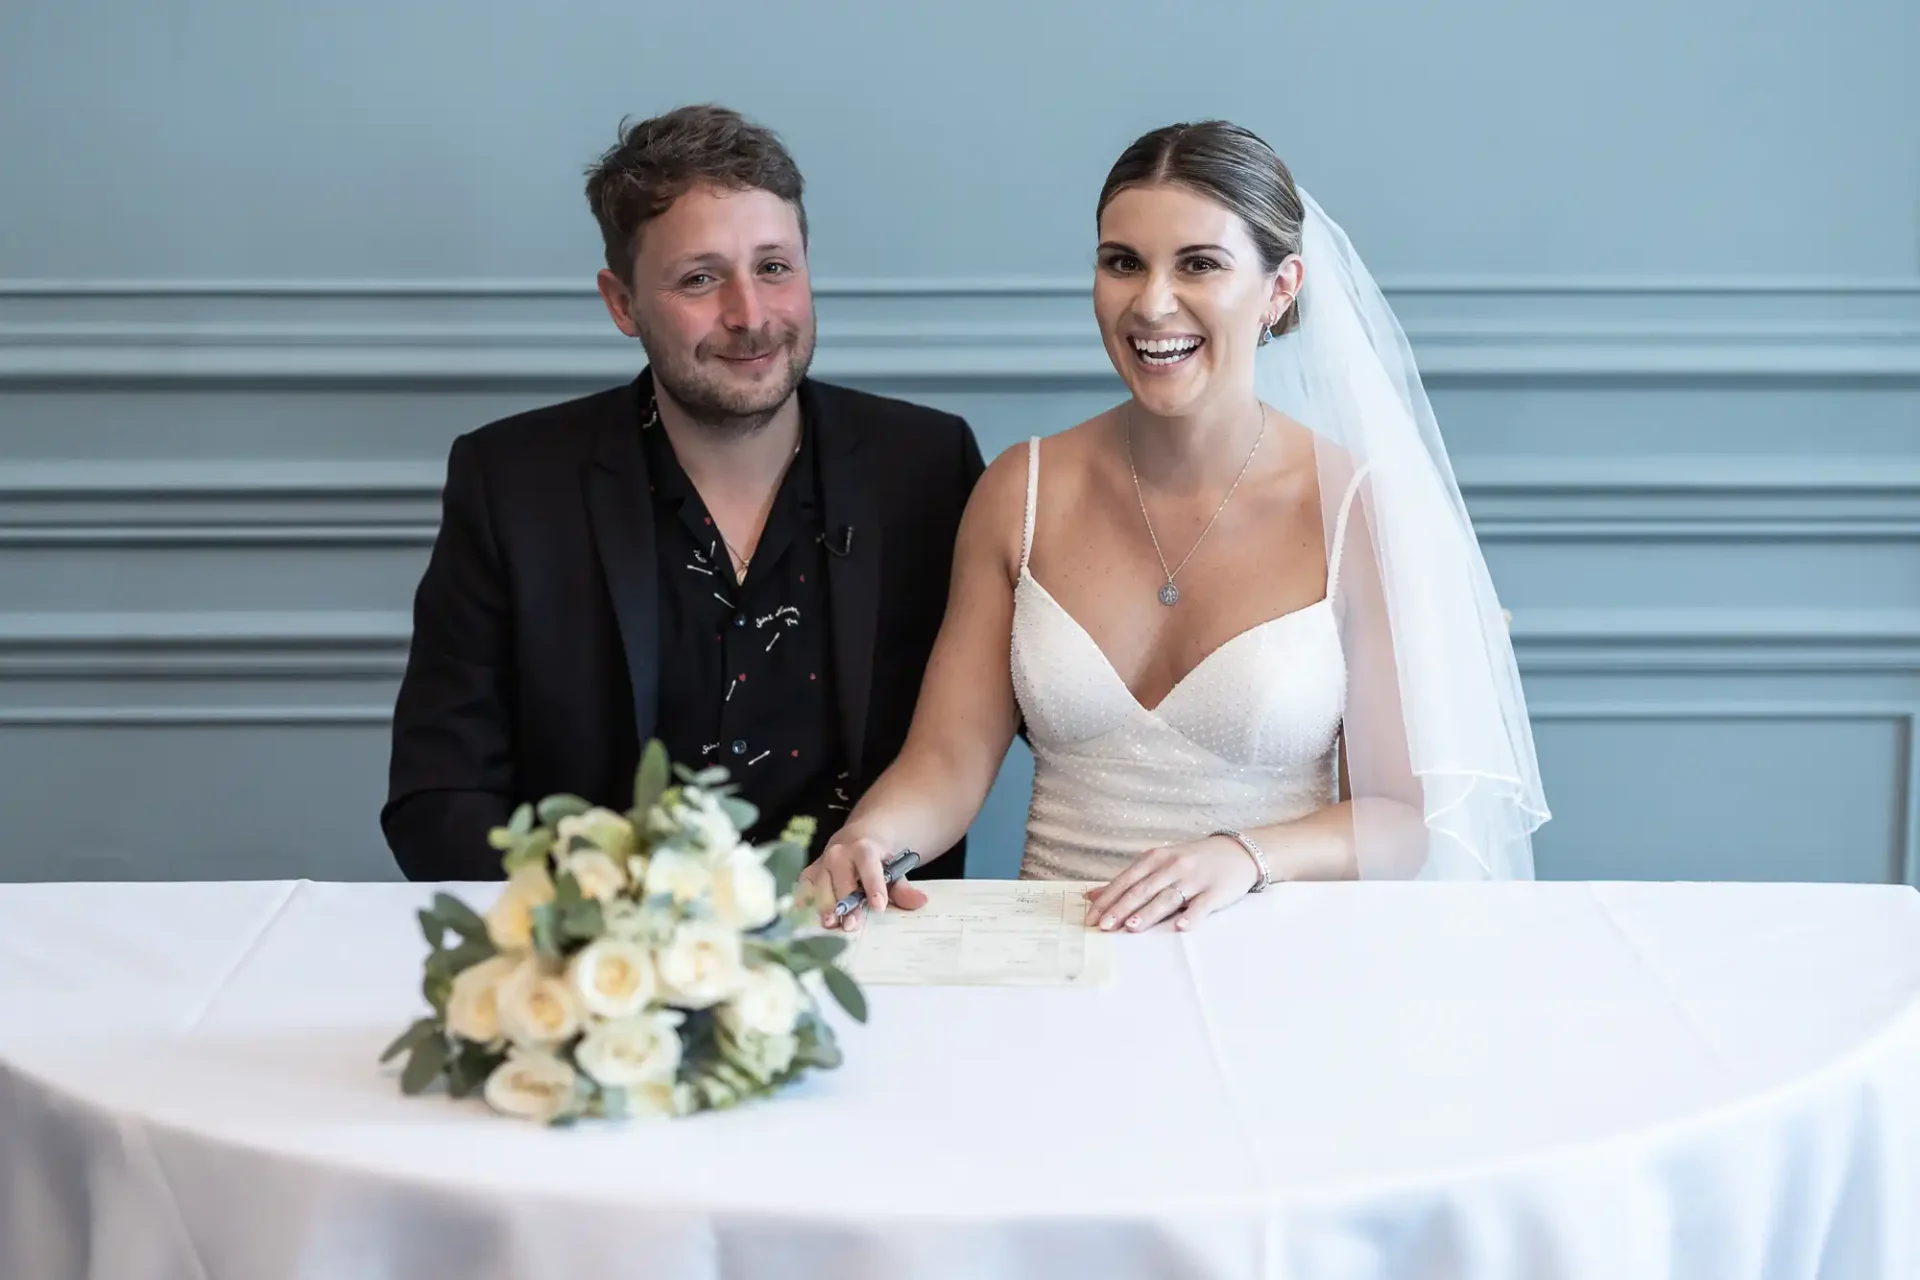 A happy couple in wedding attire signing their marriage certificate at a table, with a bouquet of flowers in the foreground.